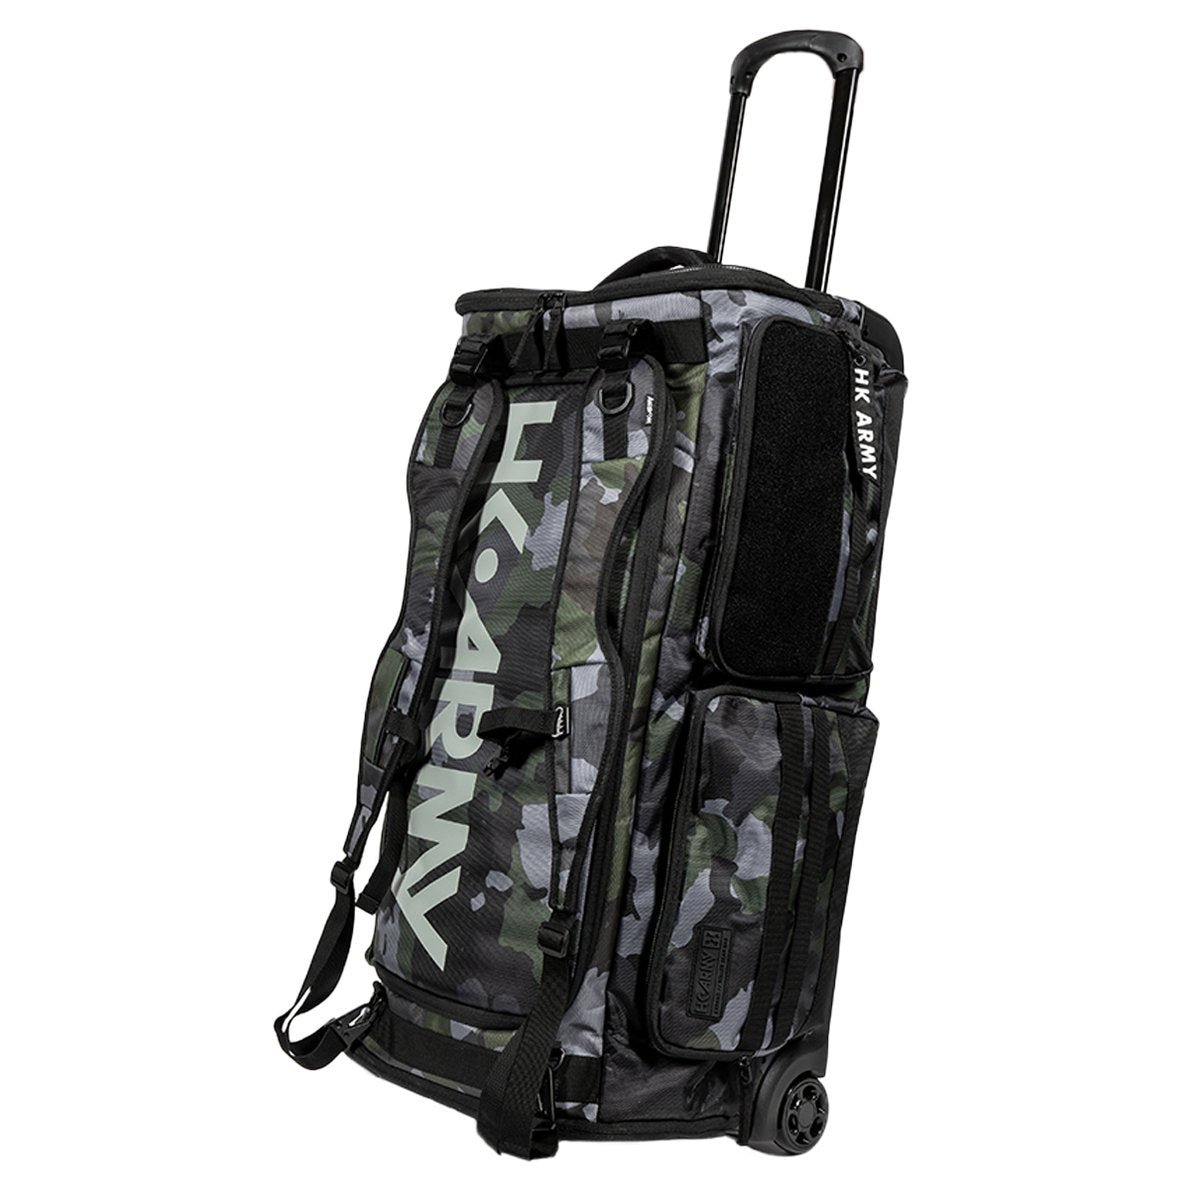 Expand 75L - Roller Gear Bag - Shroud Forest - Eminent Paintball And Airsoft